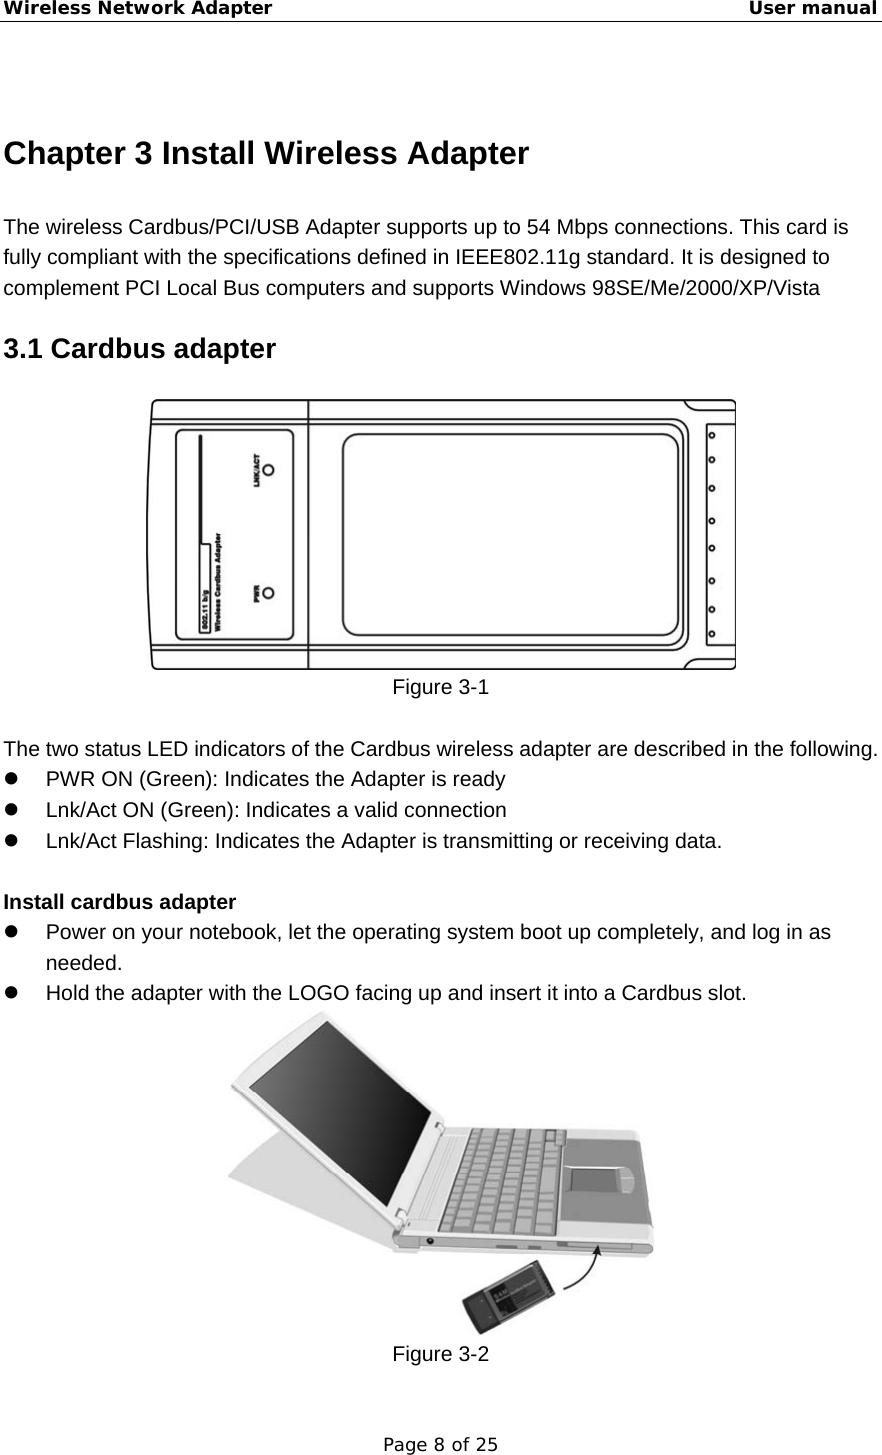 Wireless Network Adapter                                                    User manual Page 8 of 25  Chapter 3 Install Wireless Adapter The wireless Cardbus/PCI/USB Adapter supports up to 54 Mbps connections. This card is fully compliant with the specifications defined in IEEE802.11g standard. It is designed to complement PCI Local Bus computers and supports Windows 98SE/Me/2000/XP/Vista 3.1 Cardbus adapter  Figure 3-1  The two status LED indicators of the Cardbus wireless adapter are described in the following. z  PWR ON (Green): Indicates the Adapter is ready z  Lnk/Act ON (Green): Indicates a valid connection   z  Lnk/Act Flashing: Indicates the Adapter is transmitting or receiving data.  Install cardbus adapter z  Power on your notebook, let the operating system boot up completely, and log in as needed. z  Hold the adapter with the LOGO facing up and insert it into a Cardbus slot.    Figure 3-2 